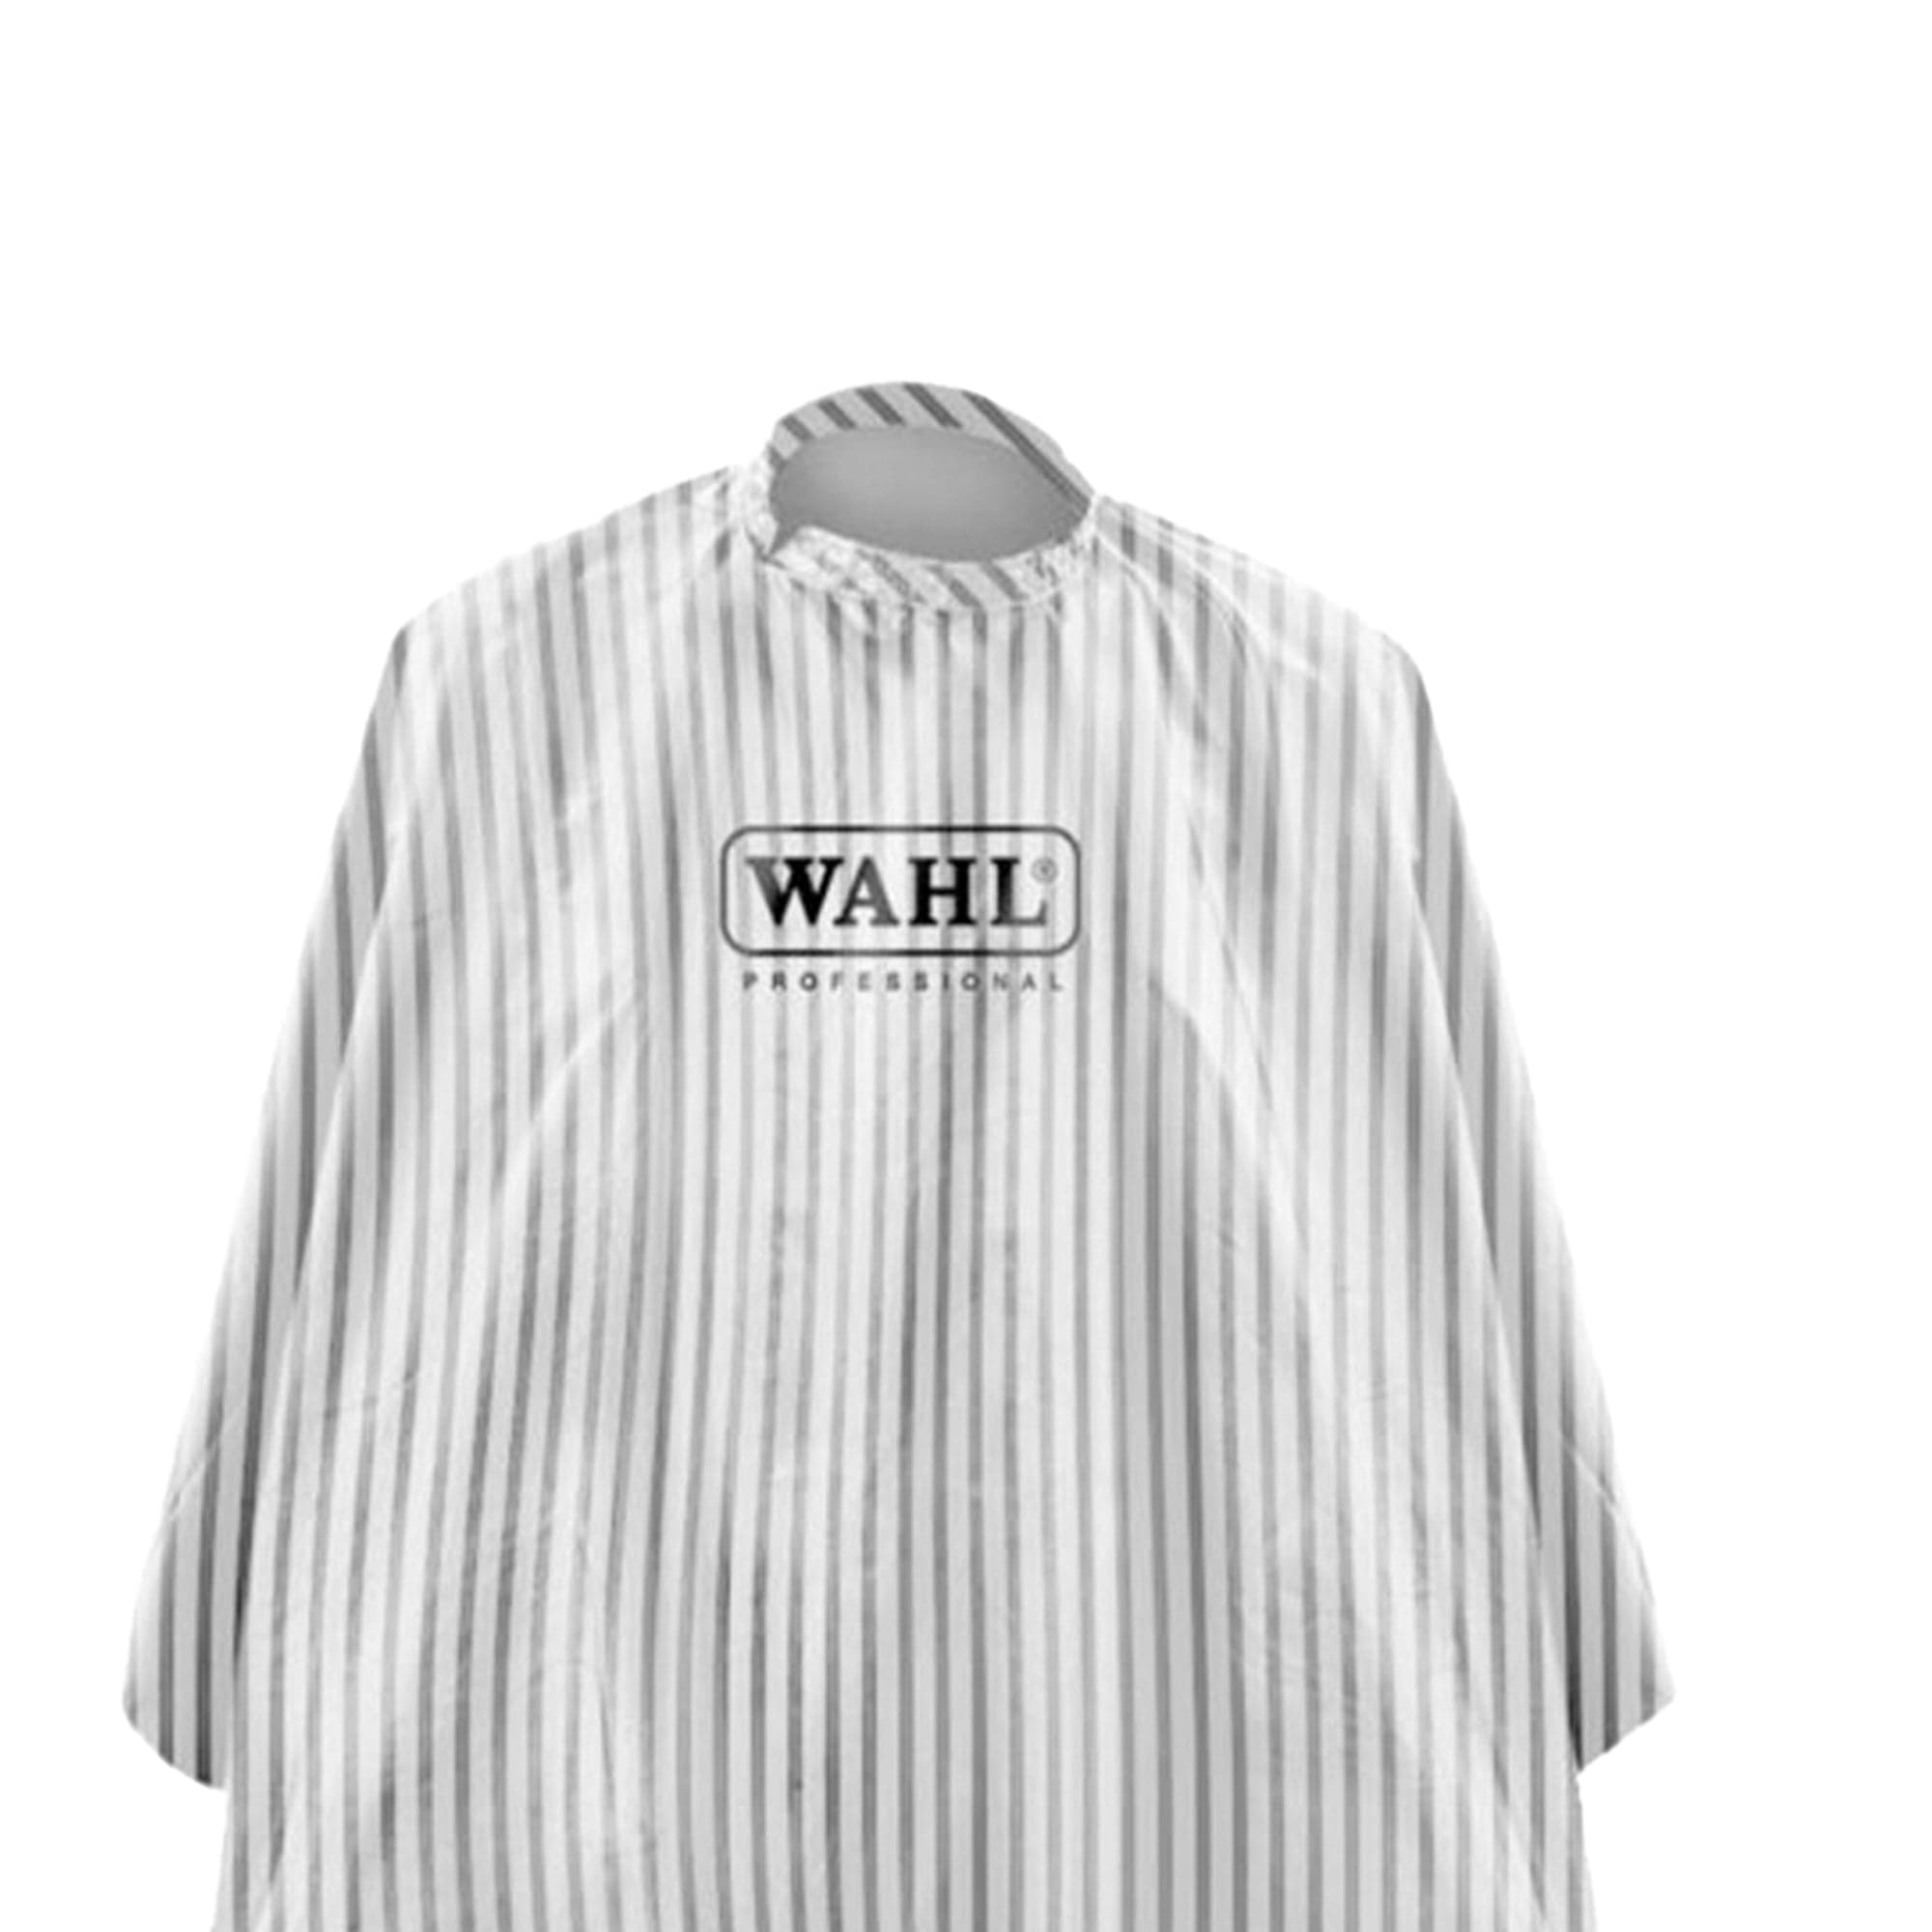 Wahl - Barber Hairdressing Hair Cutting Capes & Gowns Black & White Stripes